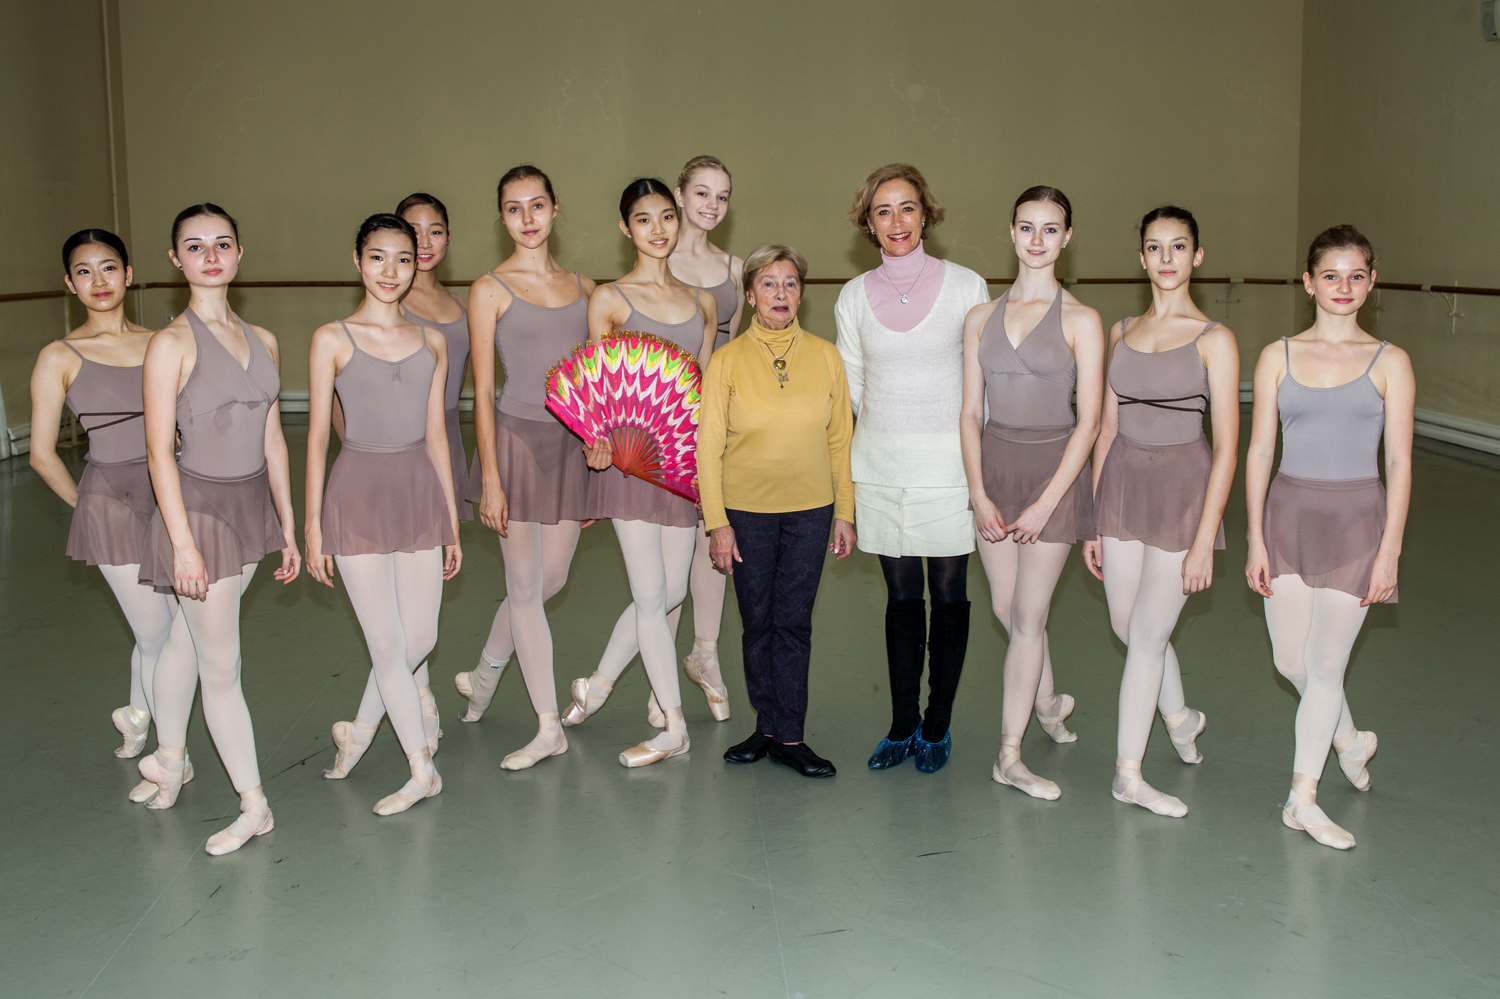 Bénédicte Windsor ballet teacher and founder of the centre Artys (Annecy, F...